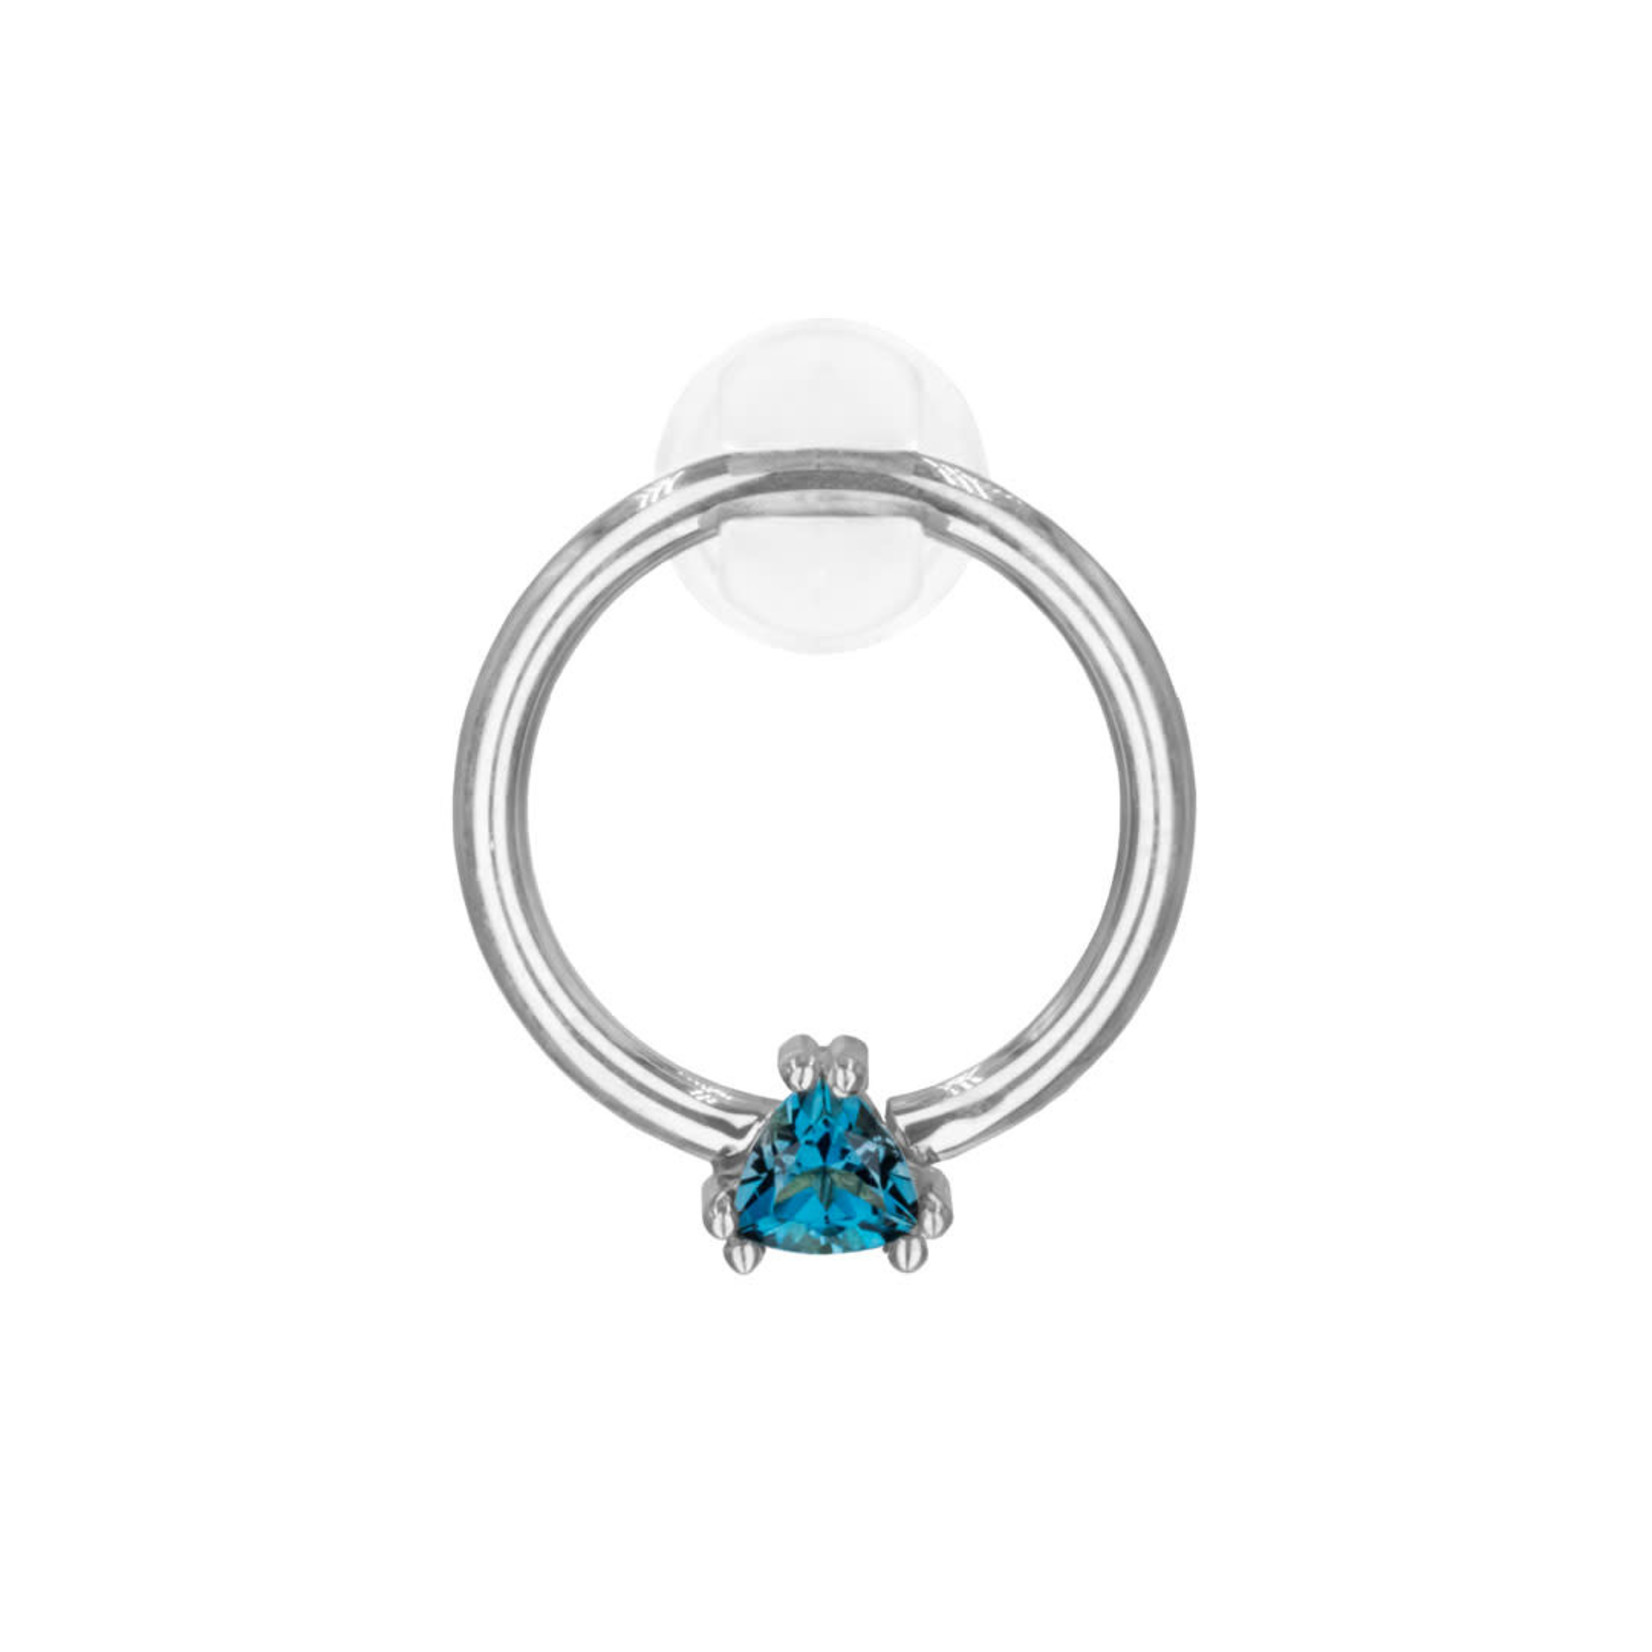 BVLA 16g BVLA "Tanti" fixed ring with 3.0 AA London Blue Topaz trillion